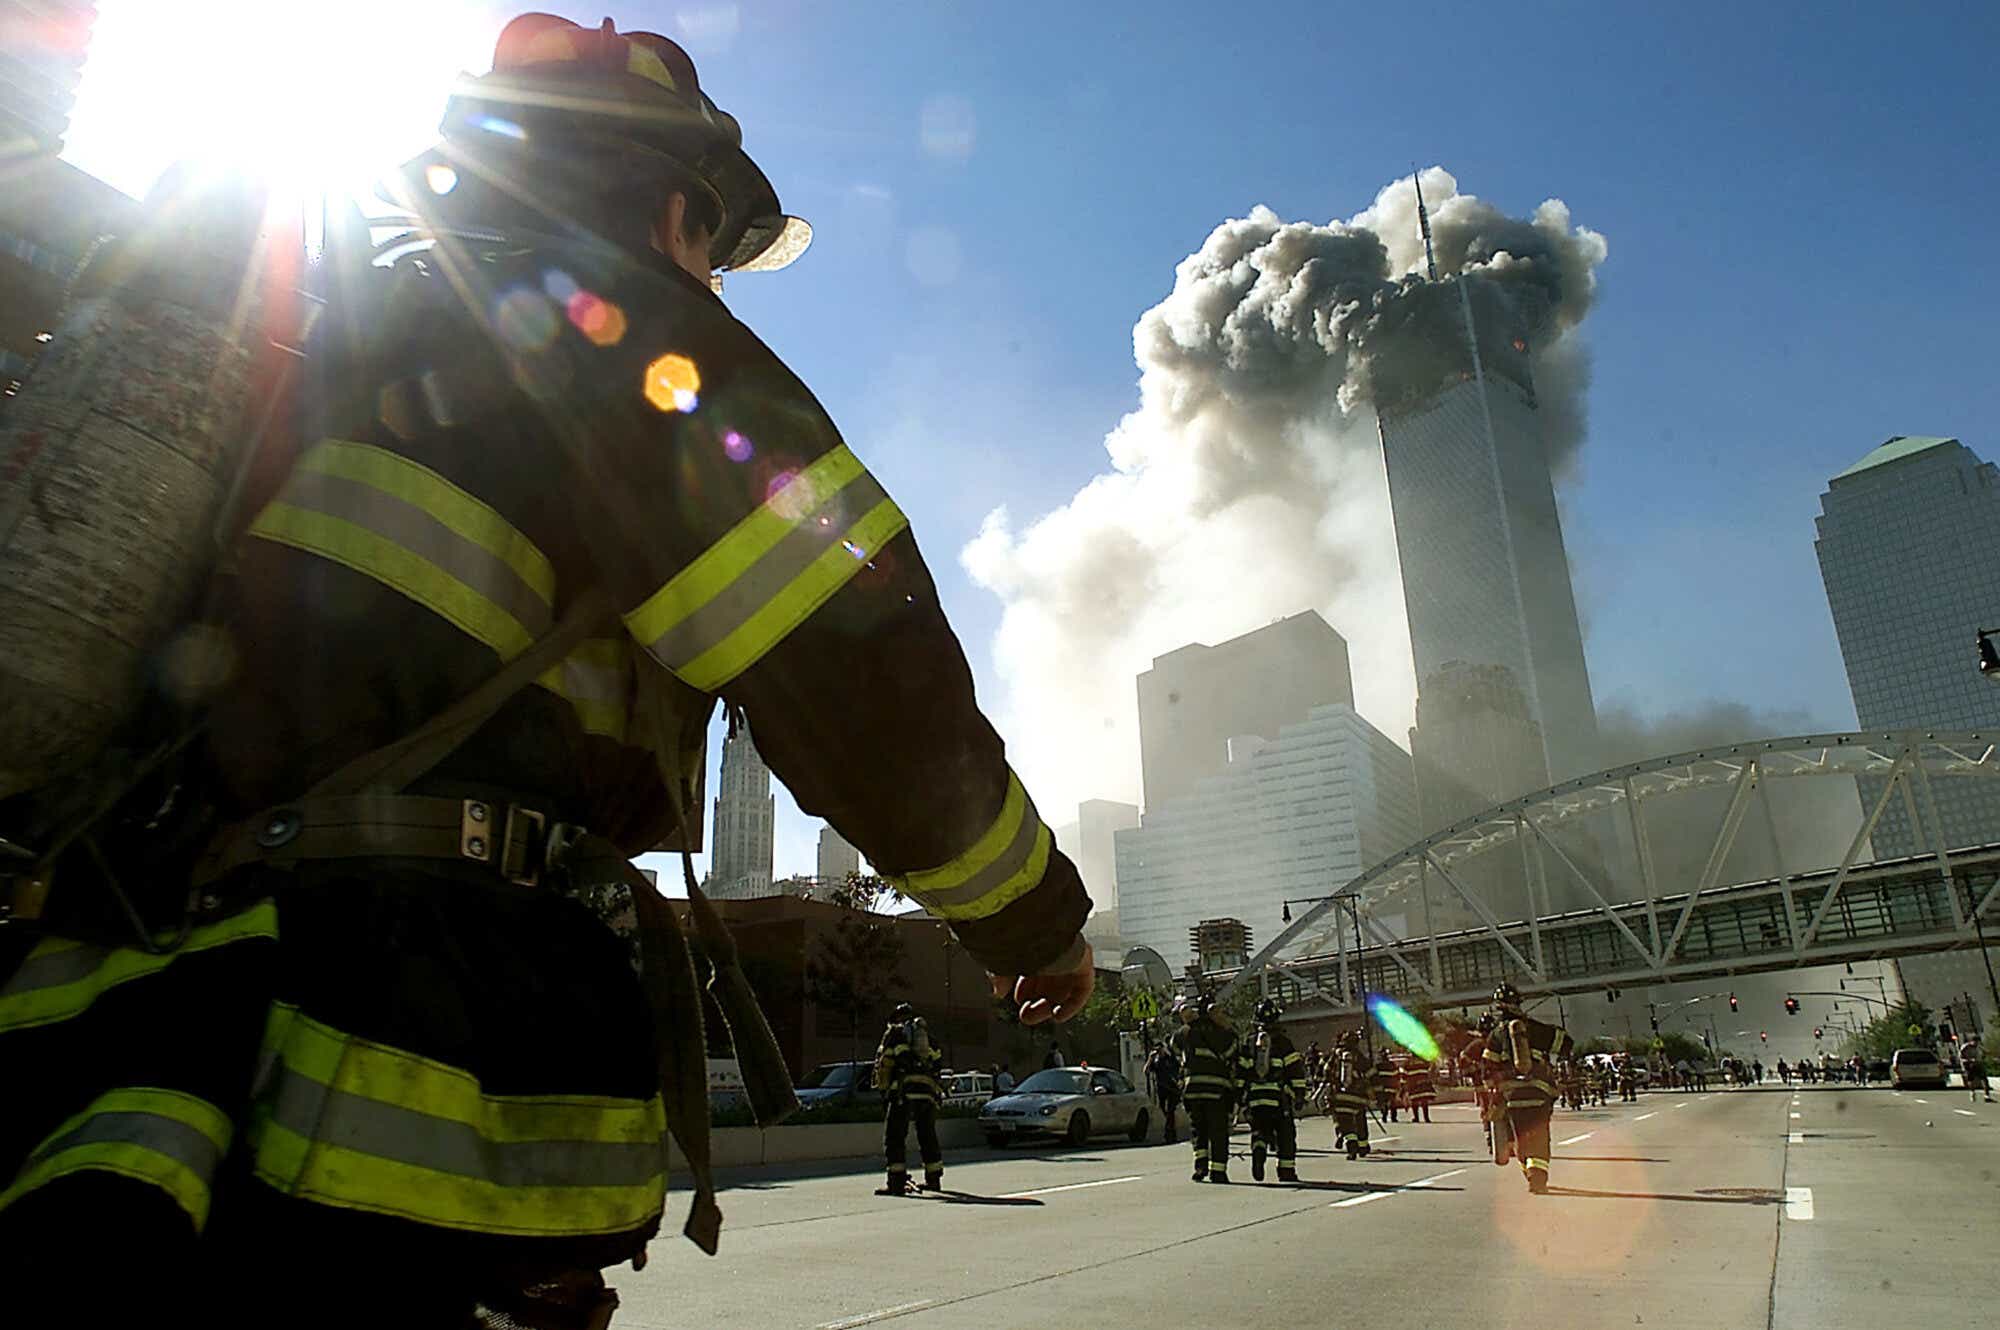 20 9/11 Photos That Tell the Story of American Tragedy